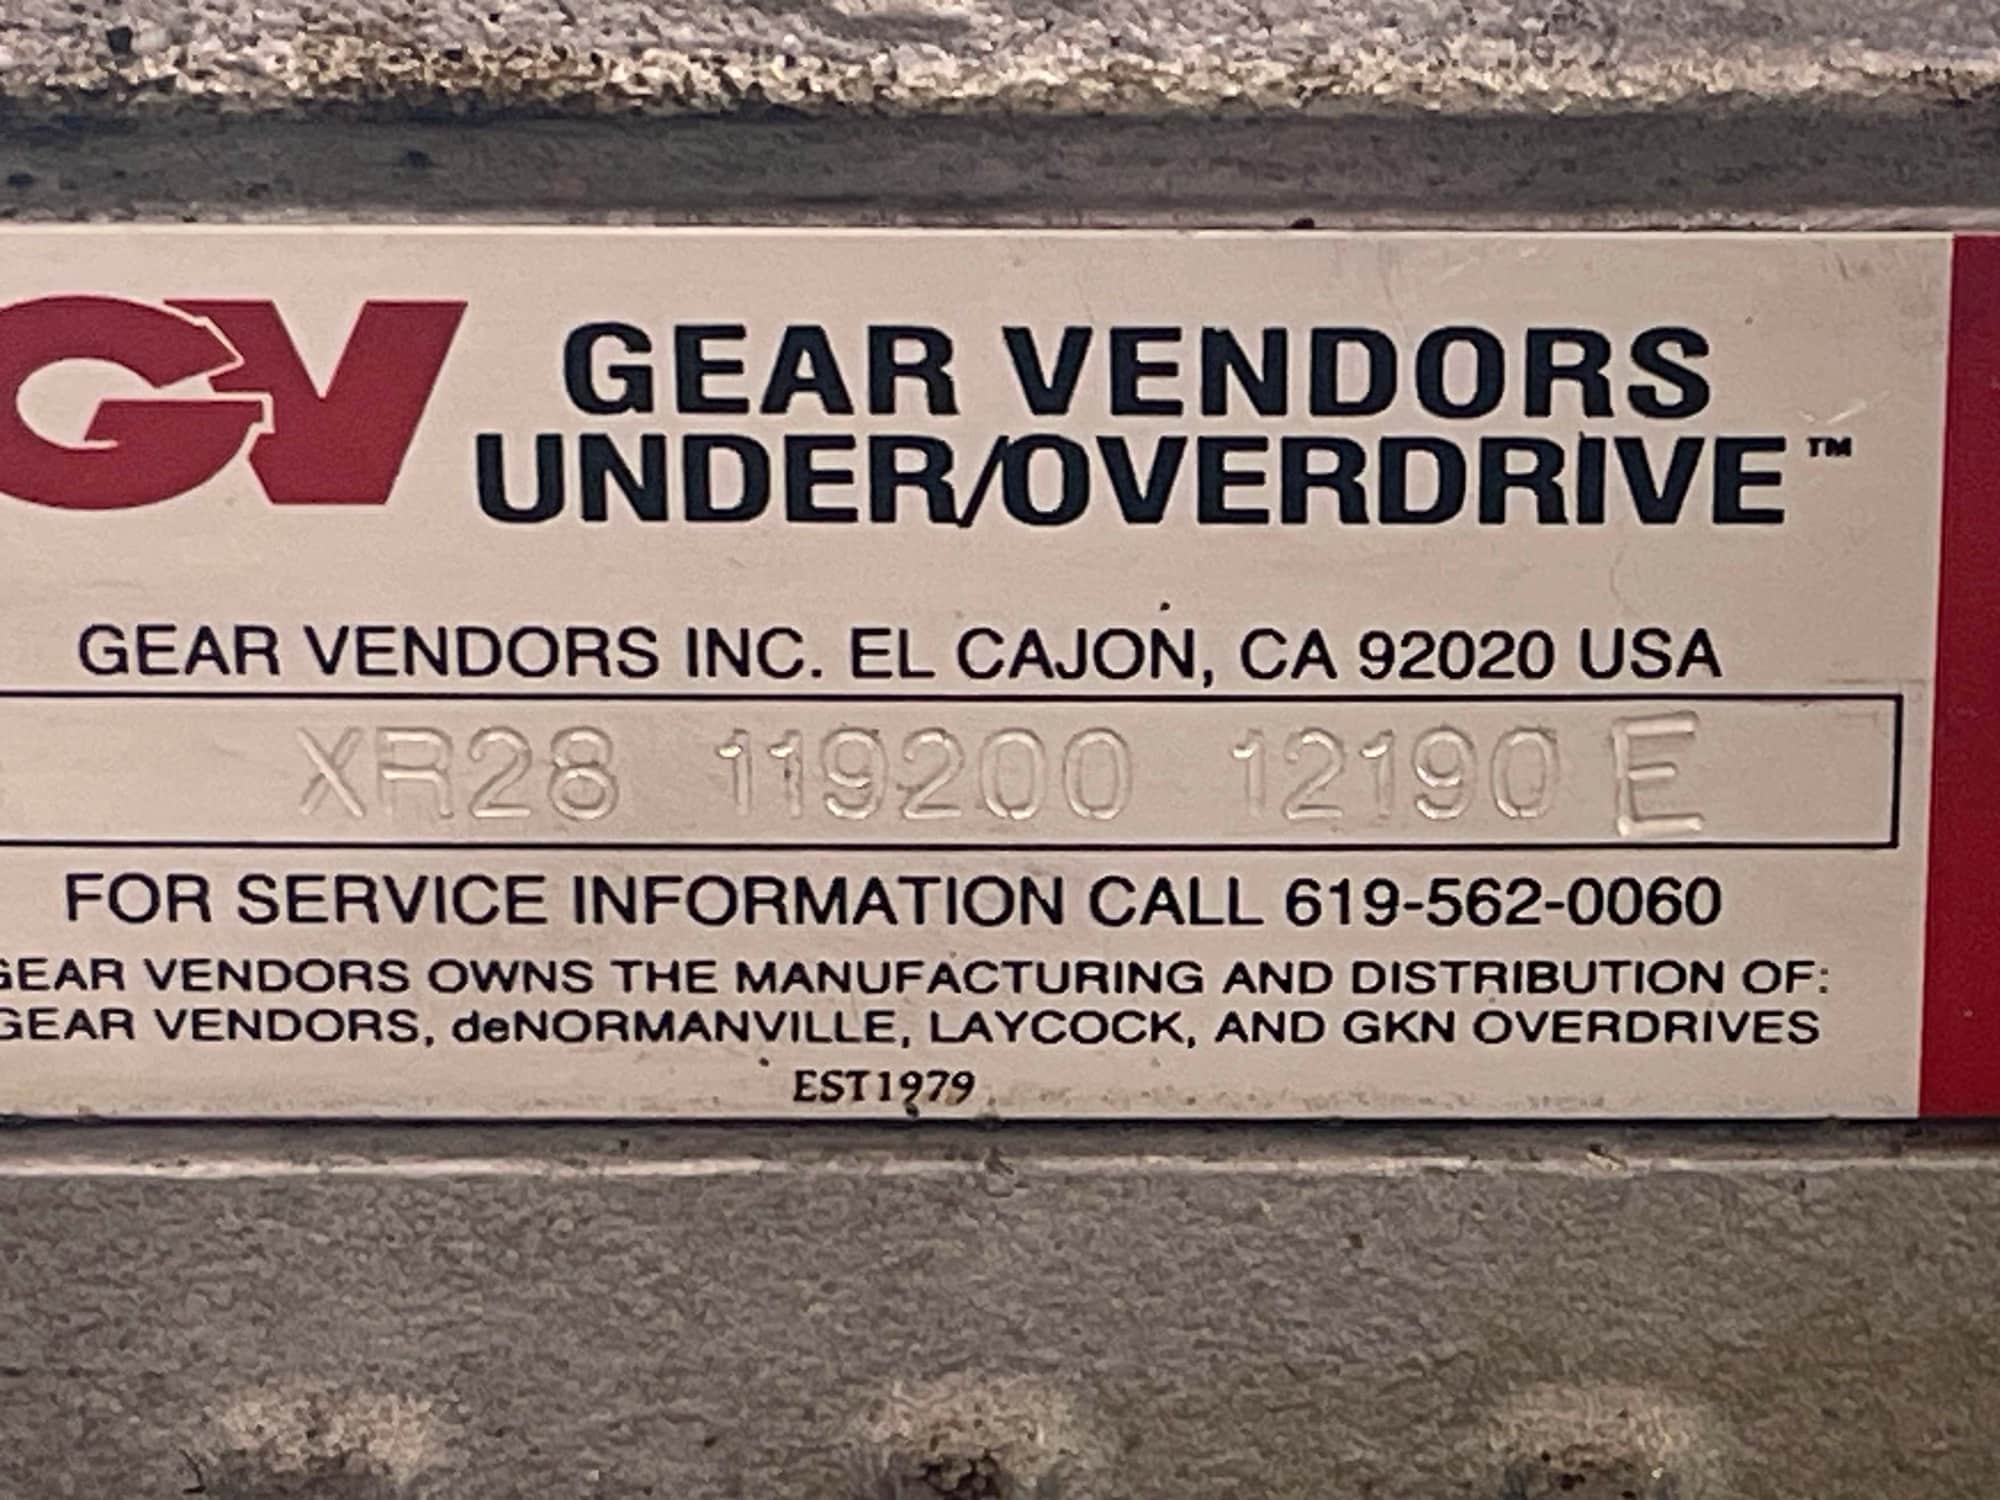 Drivetrain - Gear Venders Under/Overdrive for 2000 F500 Crew Cab E40D Trans - Used - 1999 to 2003 Ford F-550 Super Duty - Valparaiso, FL 32580, United States